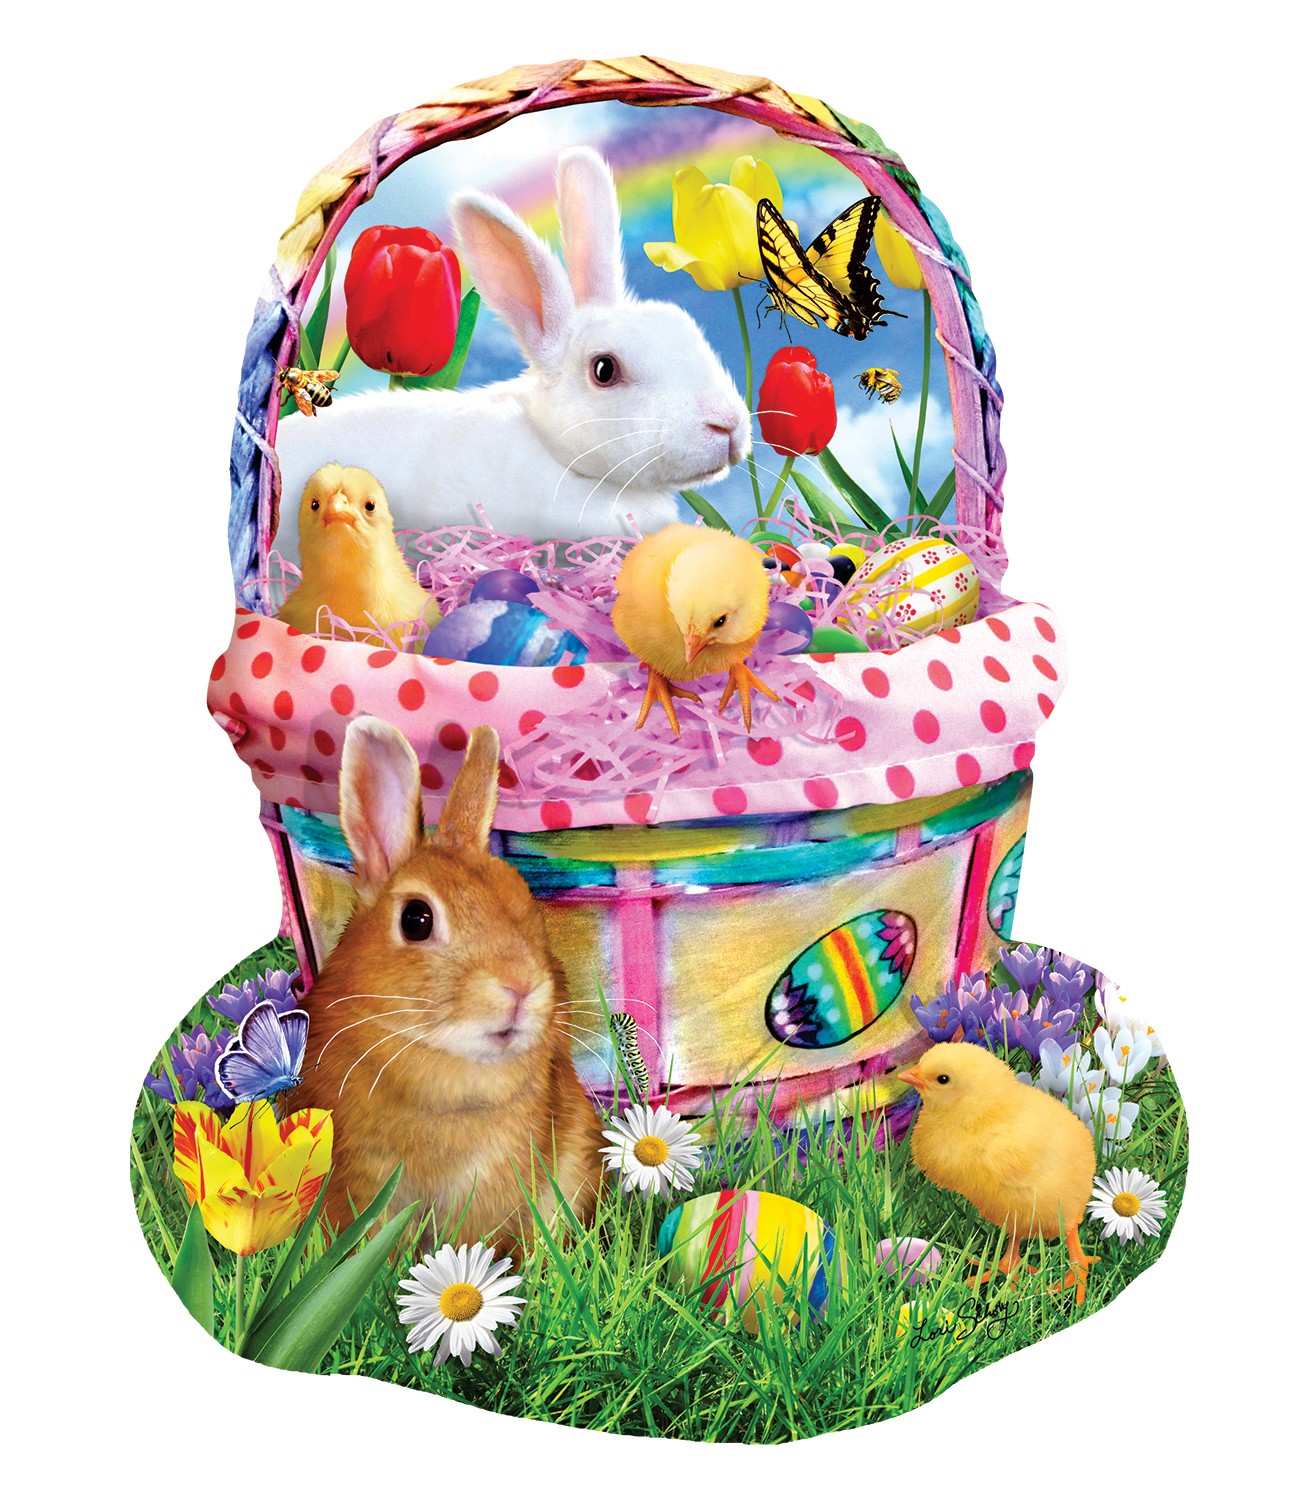 Bunny's Easter Basket 1000 Piece Shaped Jigsaw Puzzle